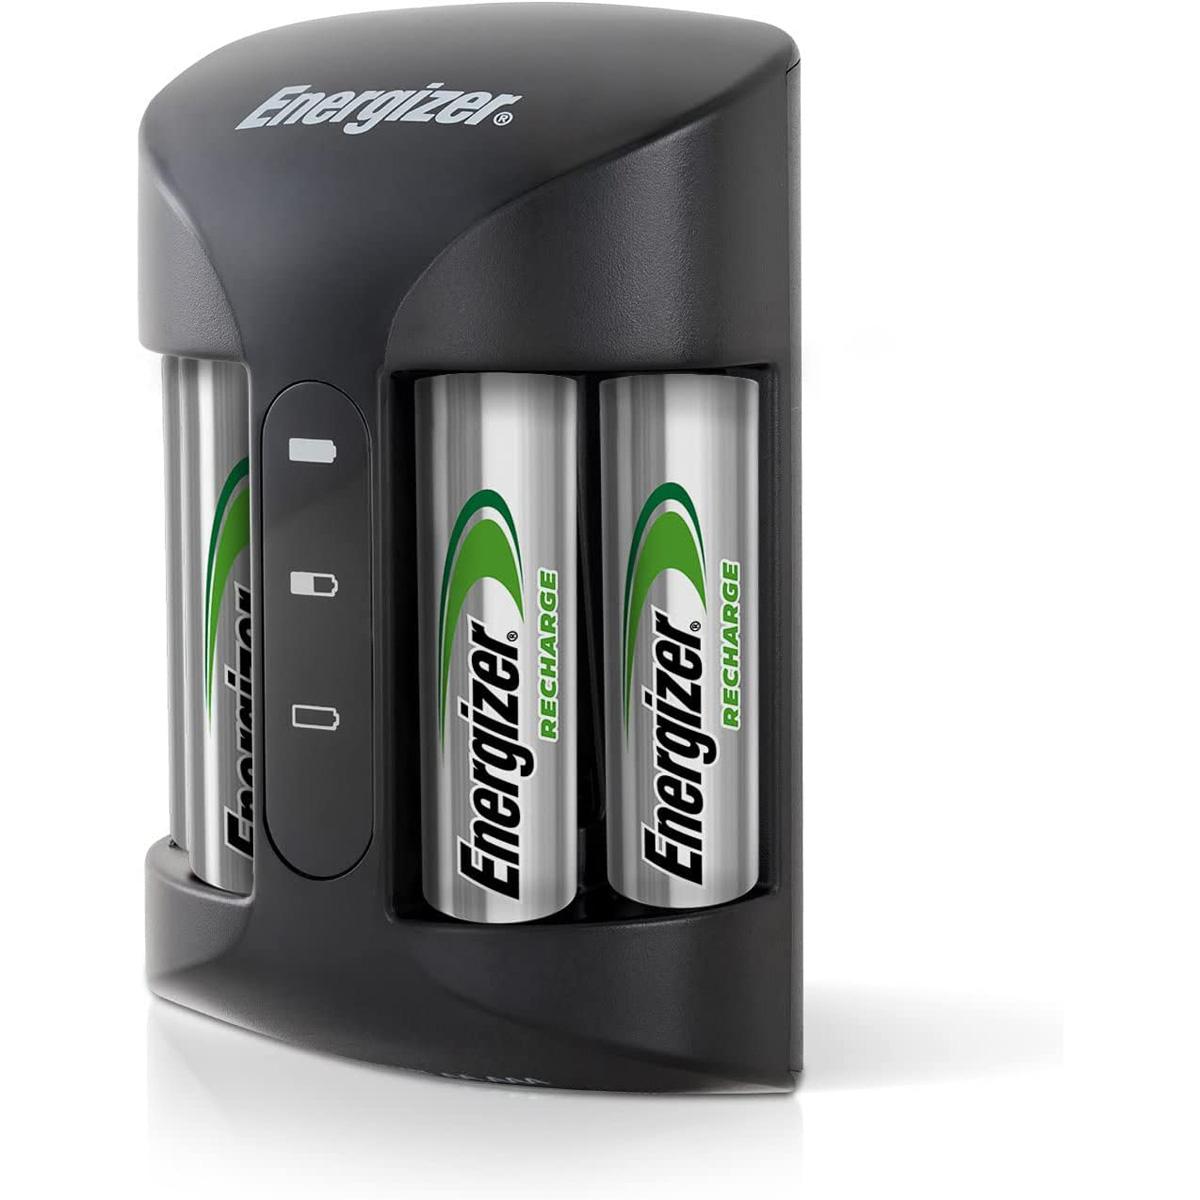 Energizer AA and AAA Charger with 4 AA Batteries for $14.99